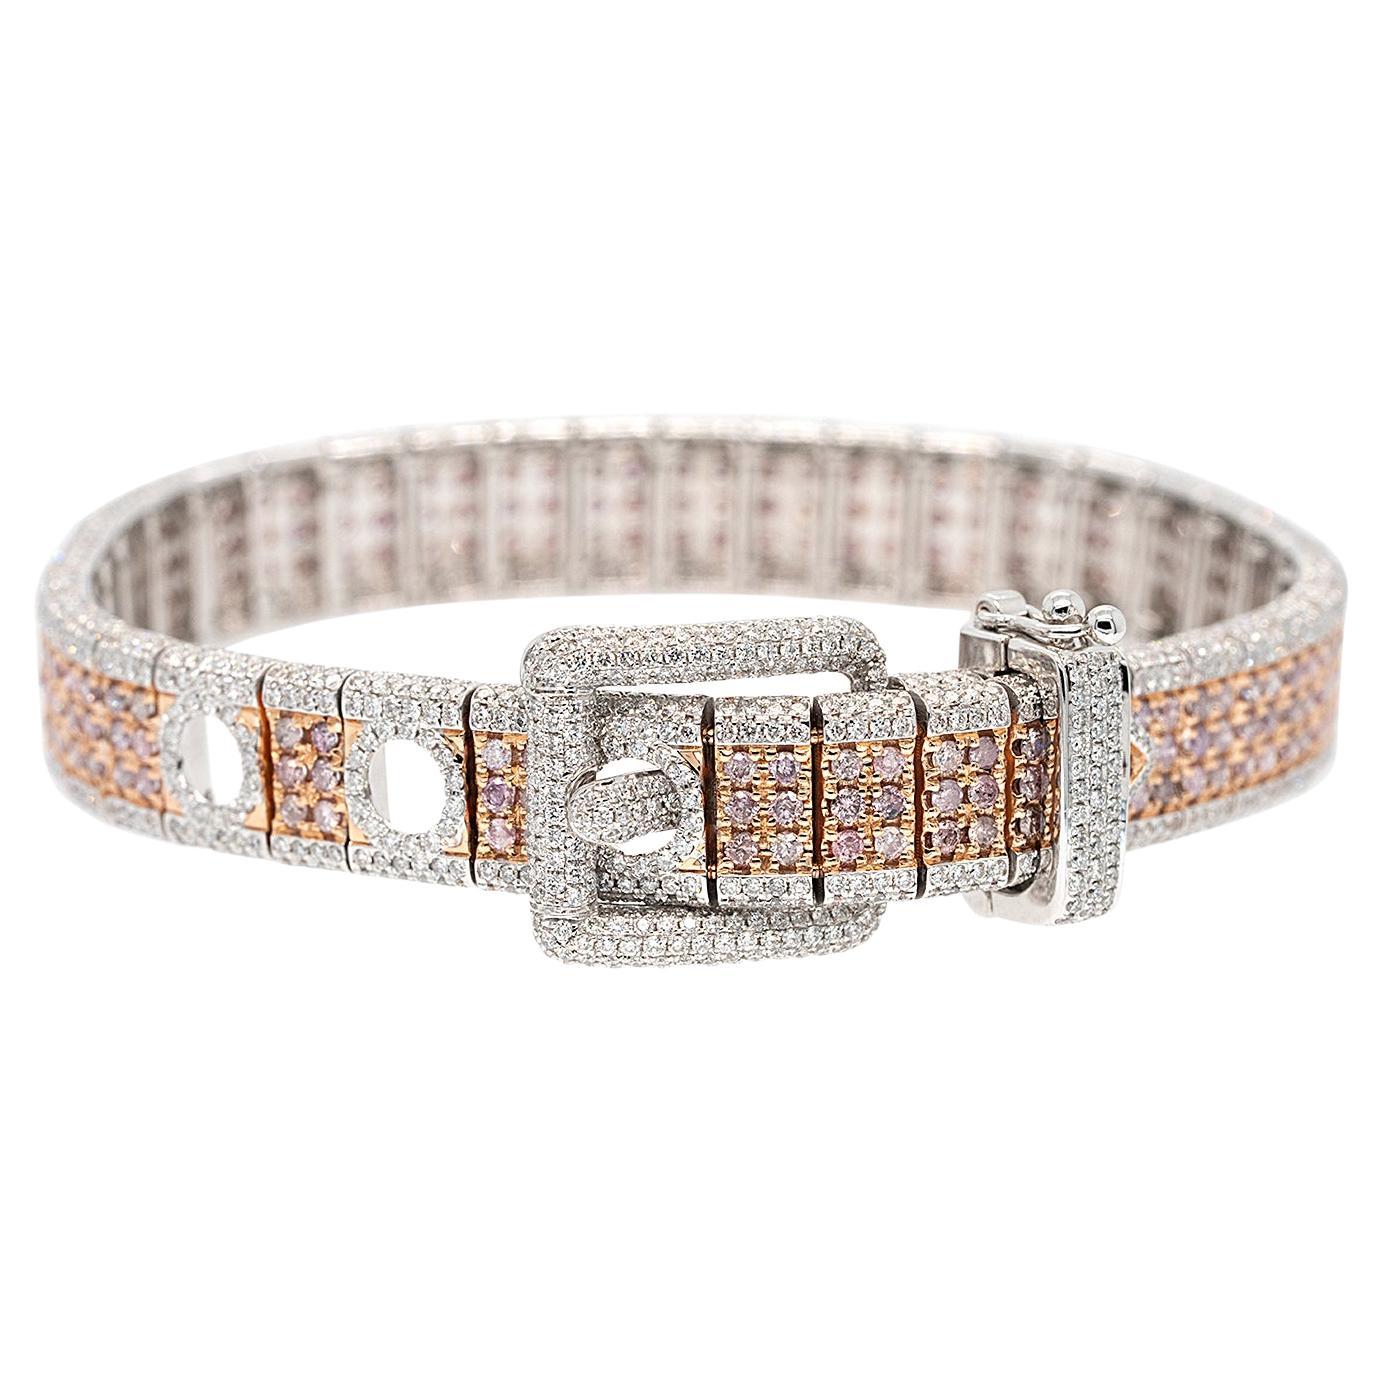 18k White & Pink Gold 5.24ct Round Brilliant and Brilliant Pink Diamond Bracelet In New Condition For Sale In Boca Raton, FL